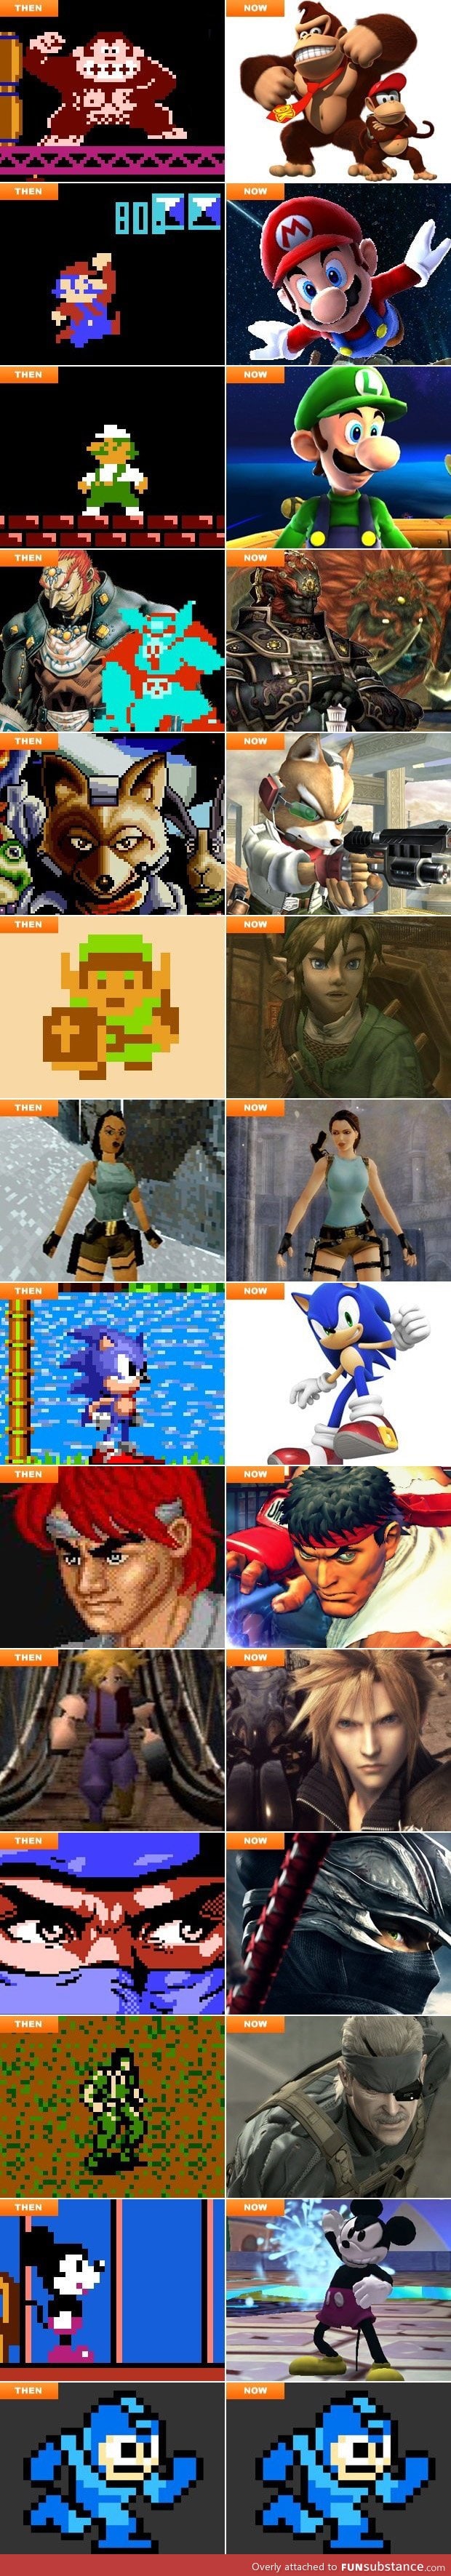 Gaming evolution over time